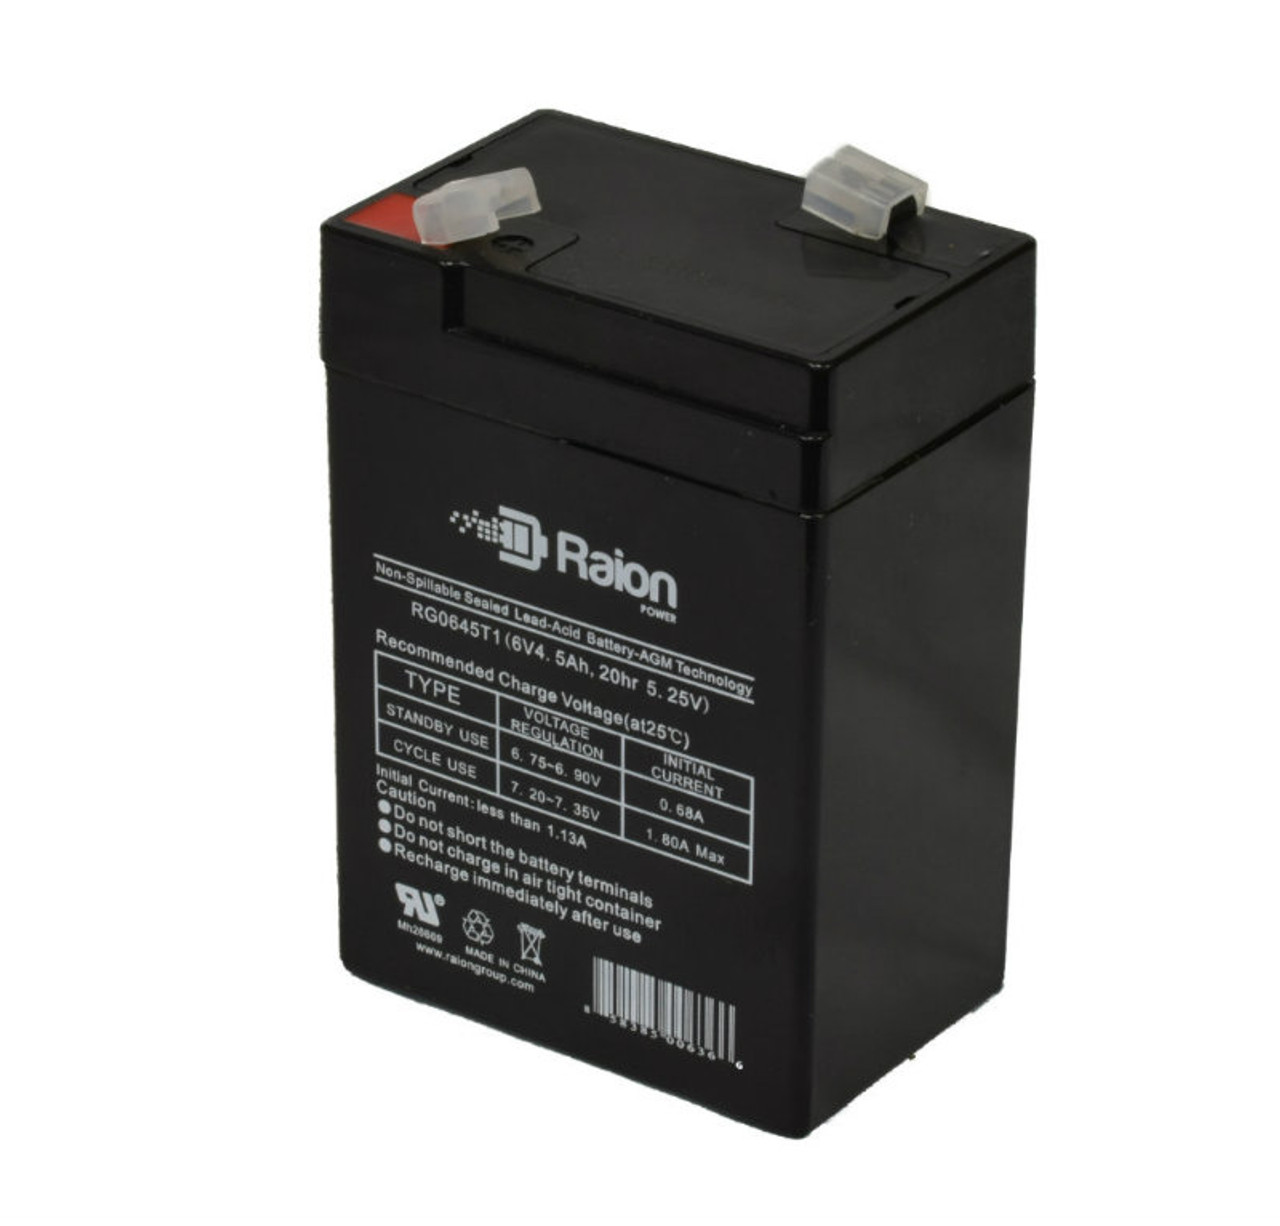 Raion Power RG0645T1 6V 4.5Ah Replacement Battery Cartridge for Motoma MS6V4